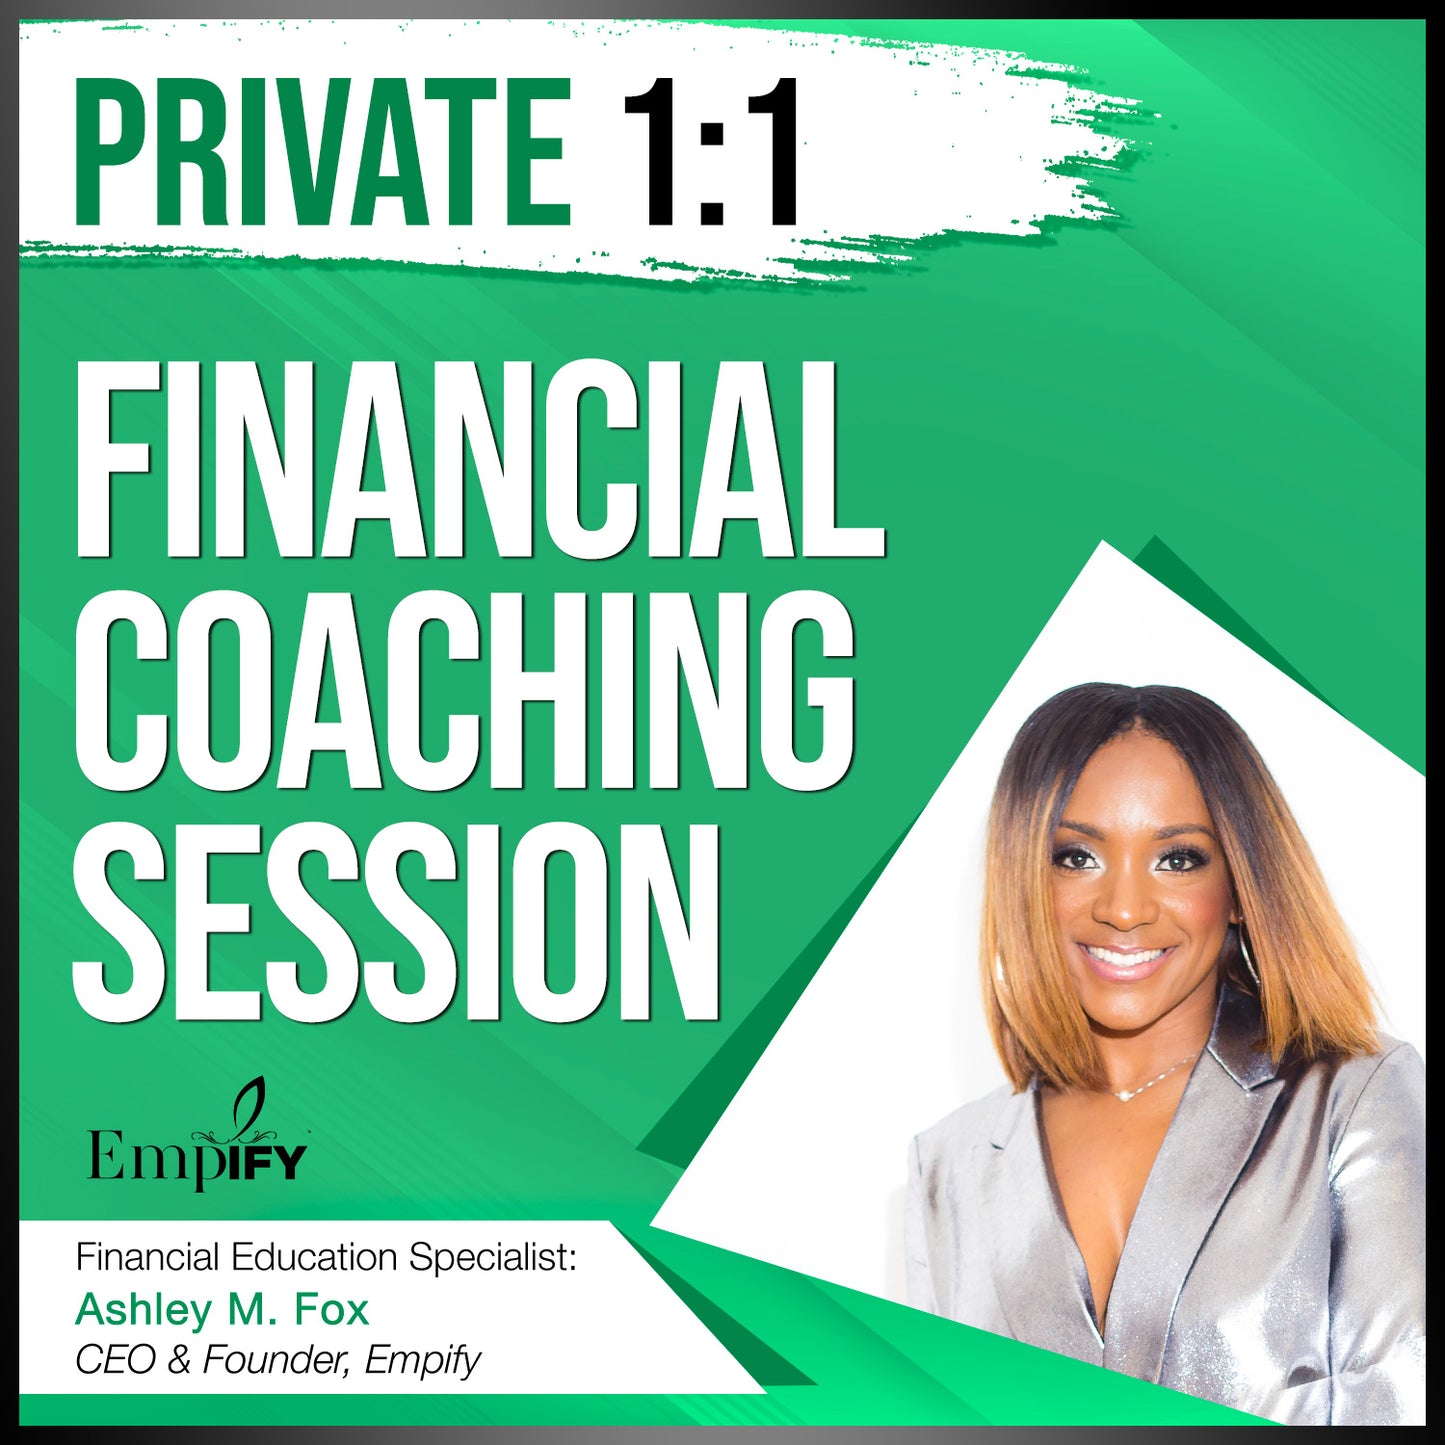 Private 1:1 Coaching Session